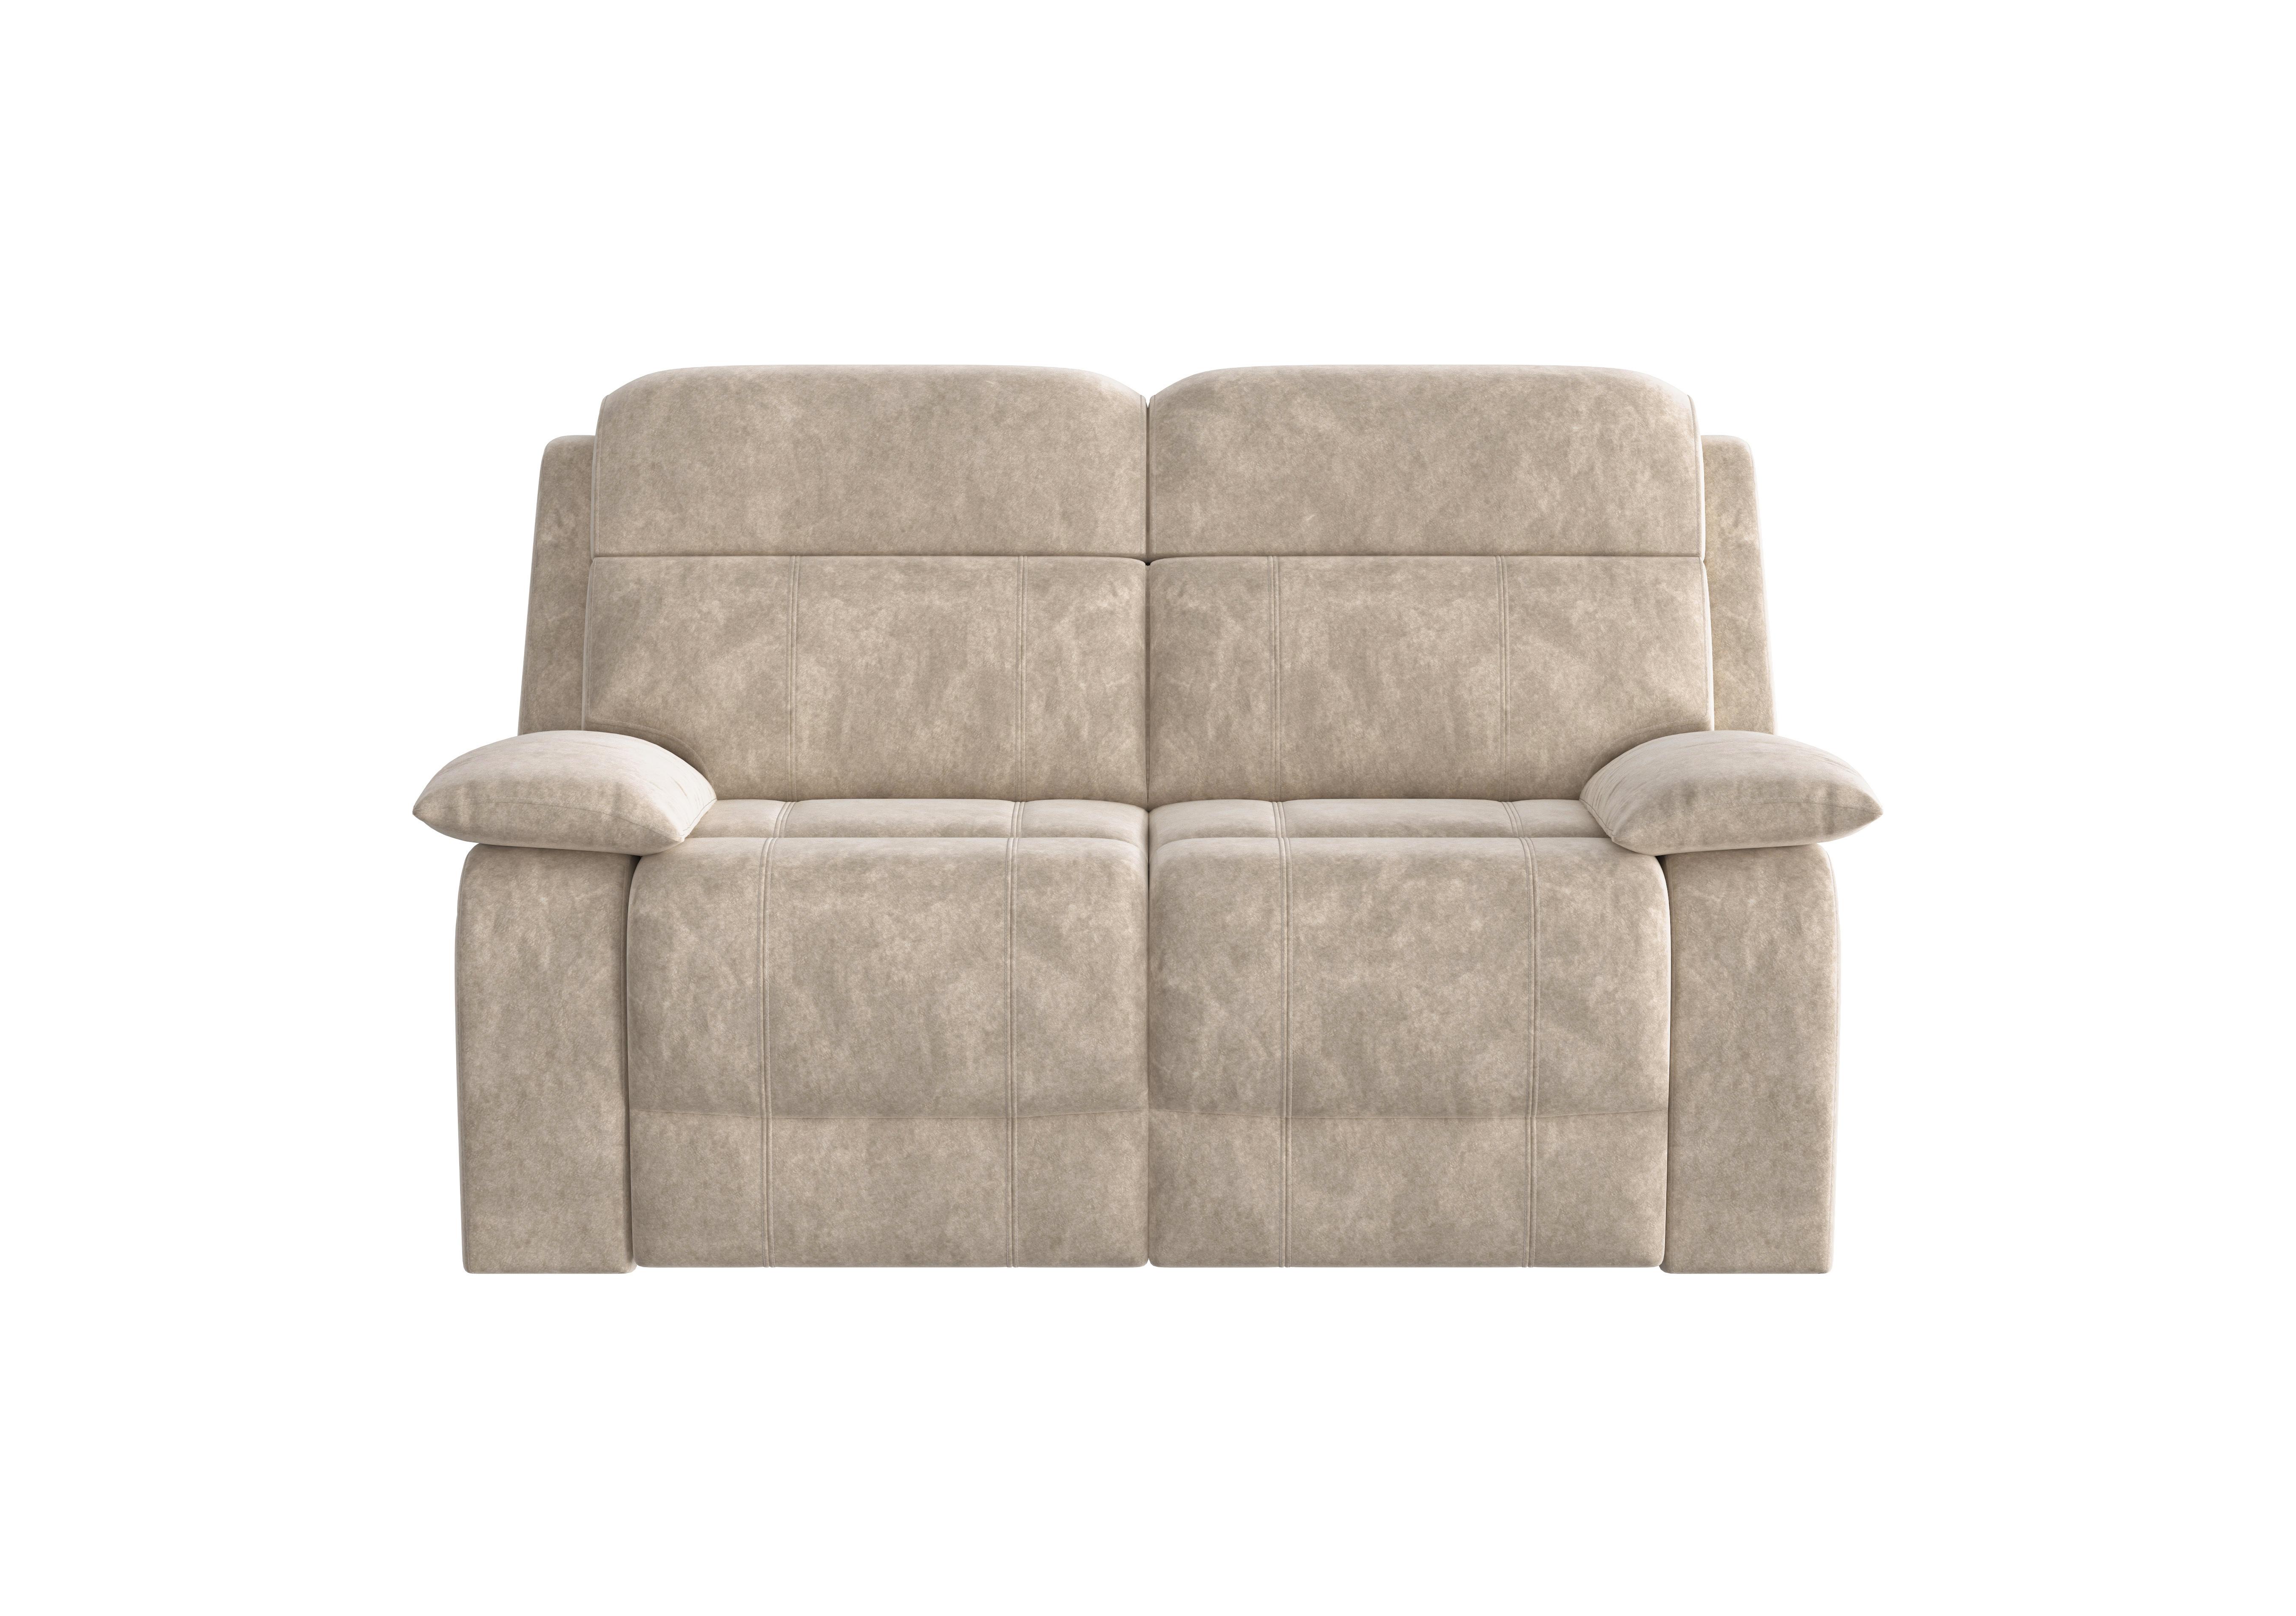 Moreno 2 Seater Fabric Power Recliner Sofa with Power Headrests in Bfa-Bnn-R26 Cream on Furniture Village